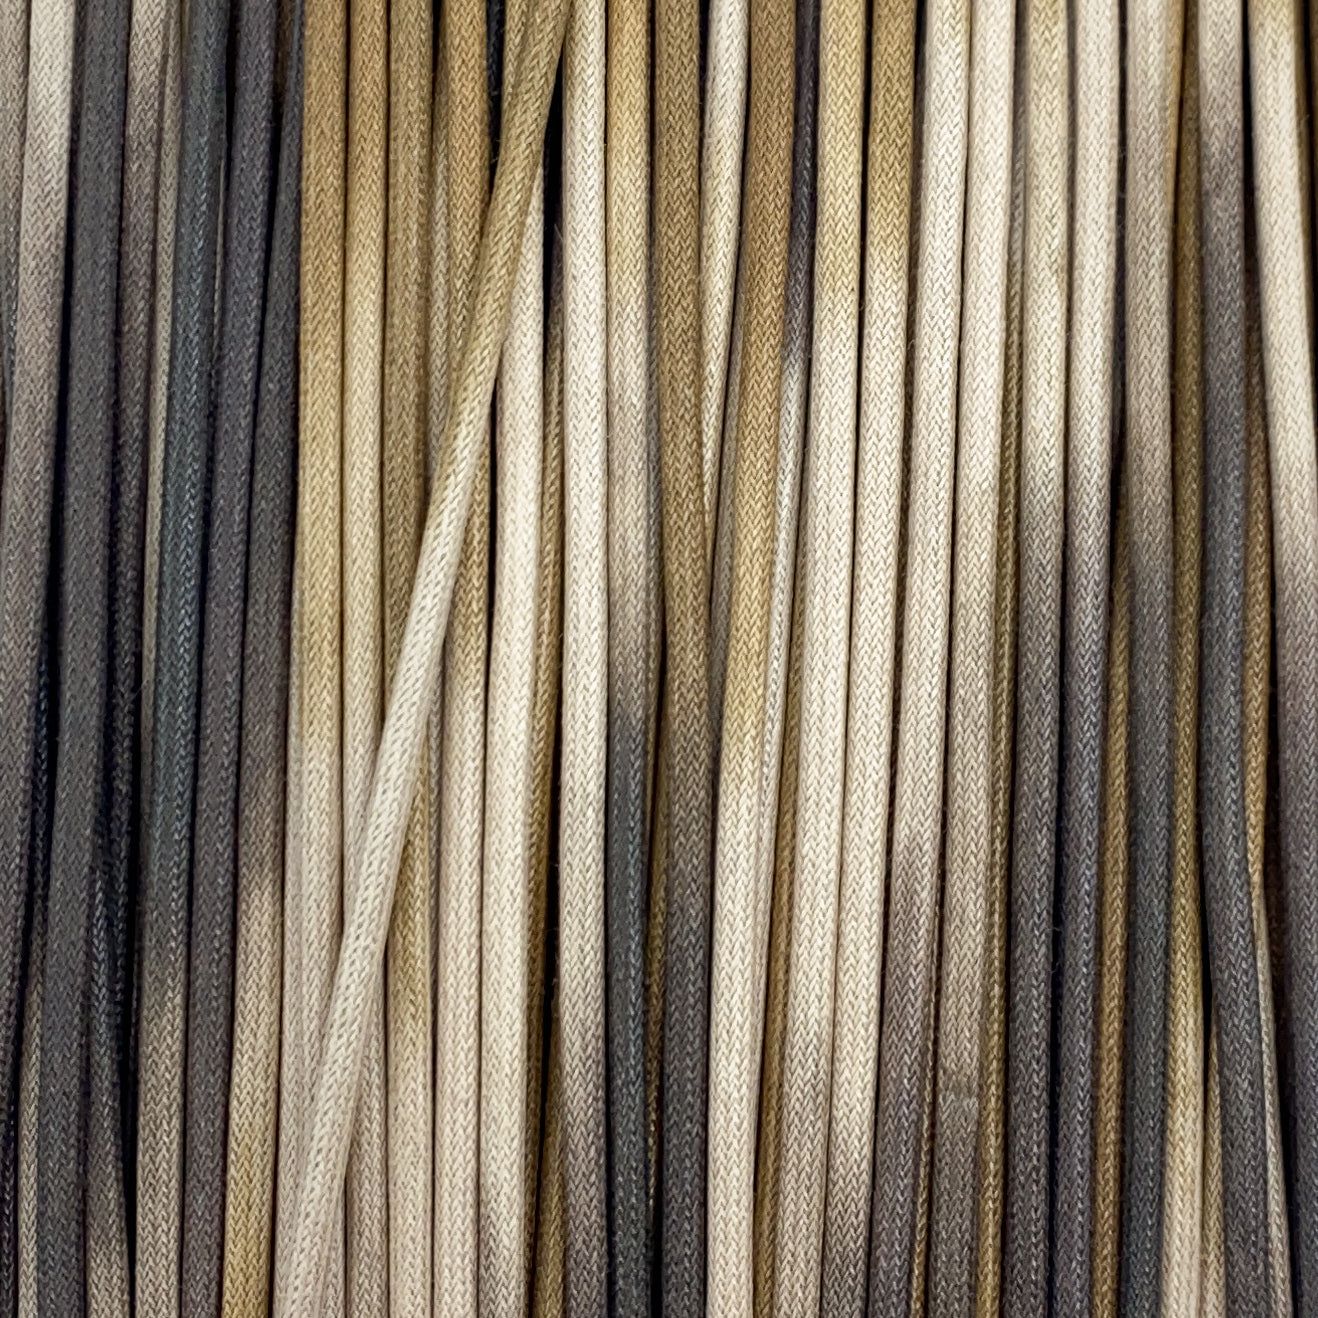 3mm Variegated Waxed Cotton - 3 yds.